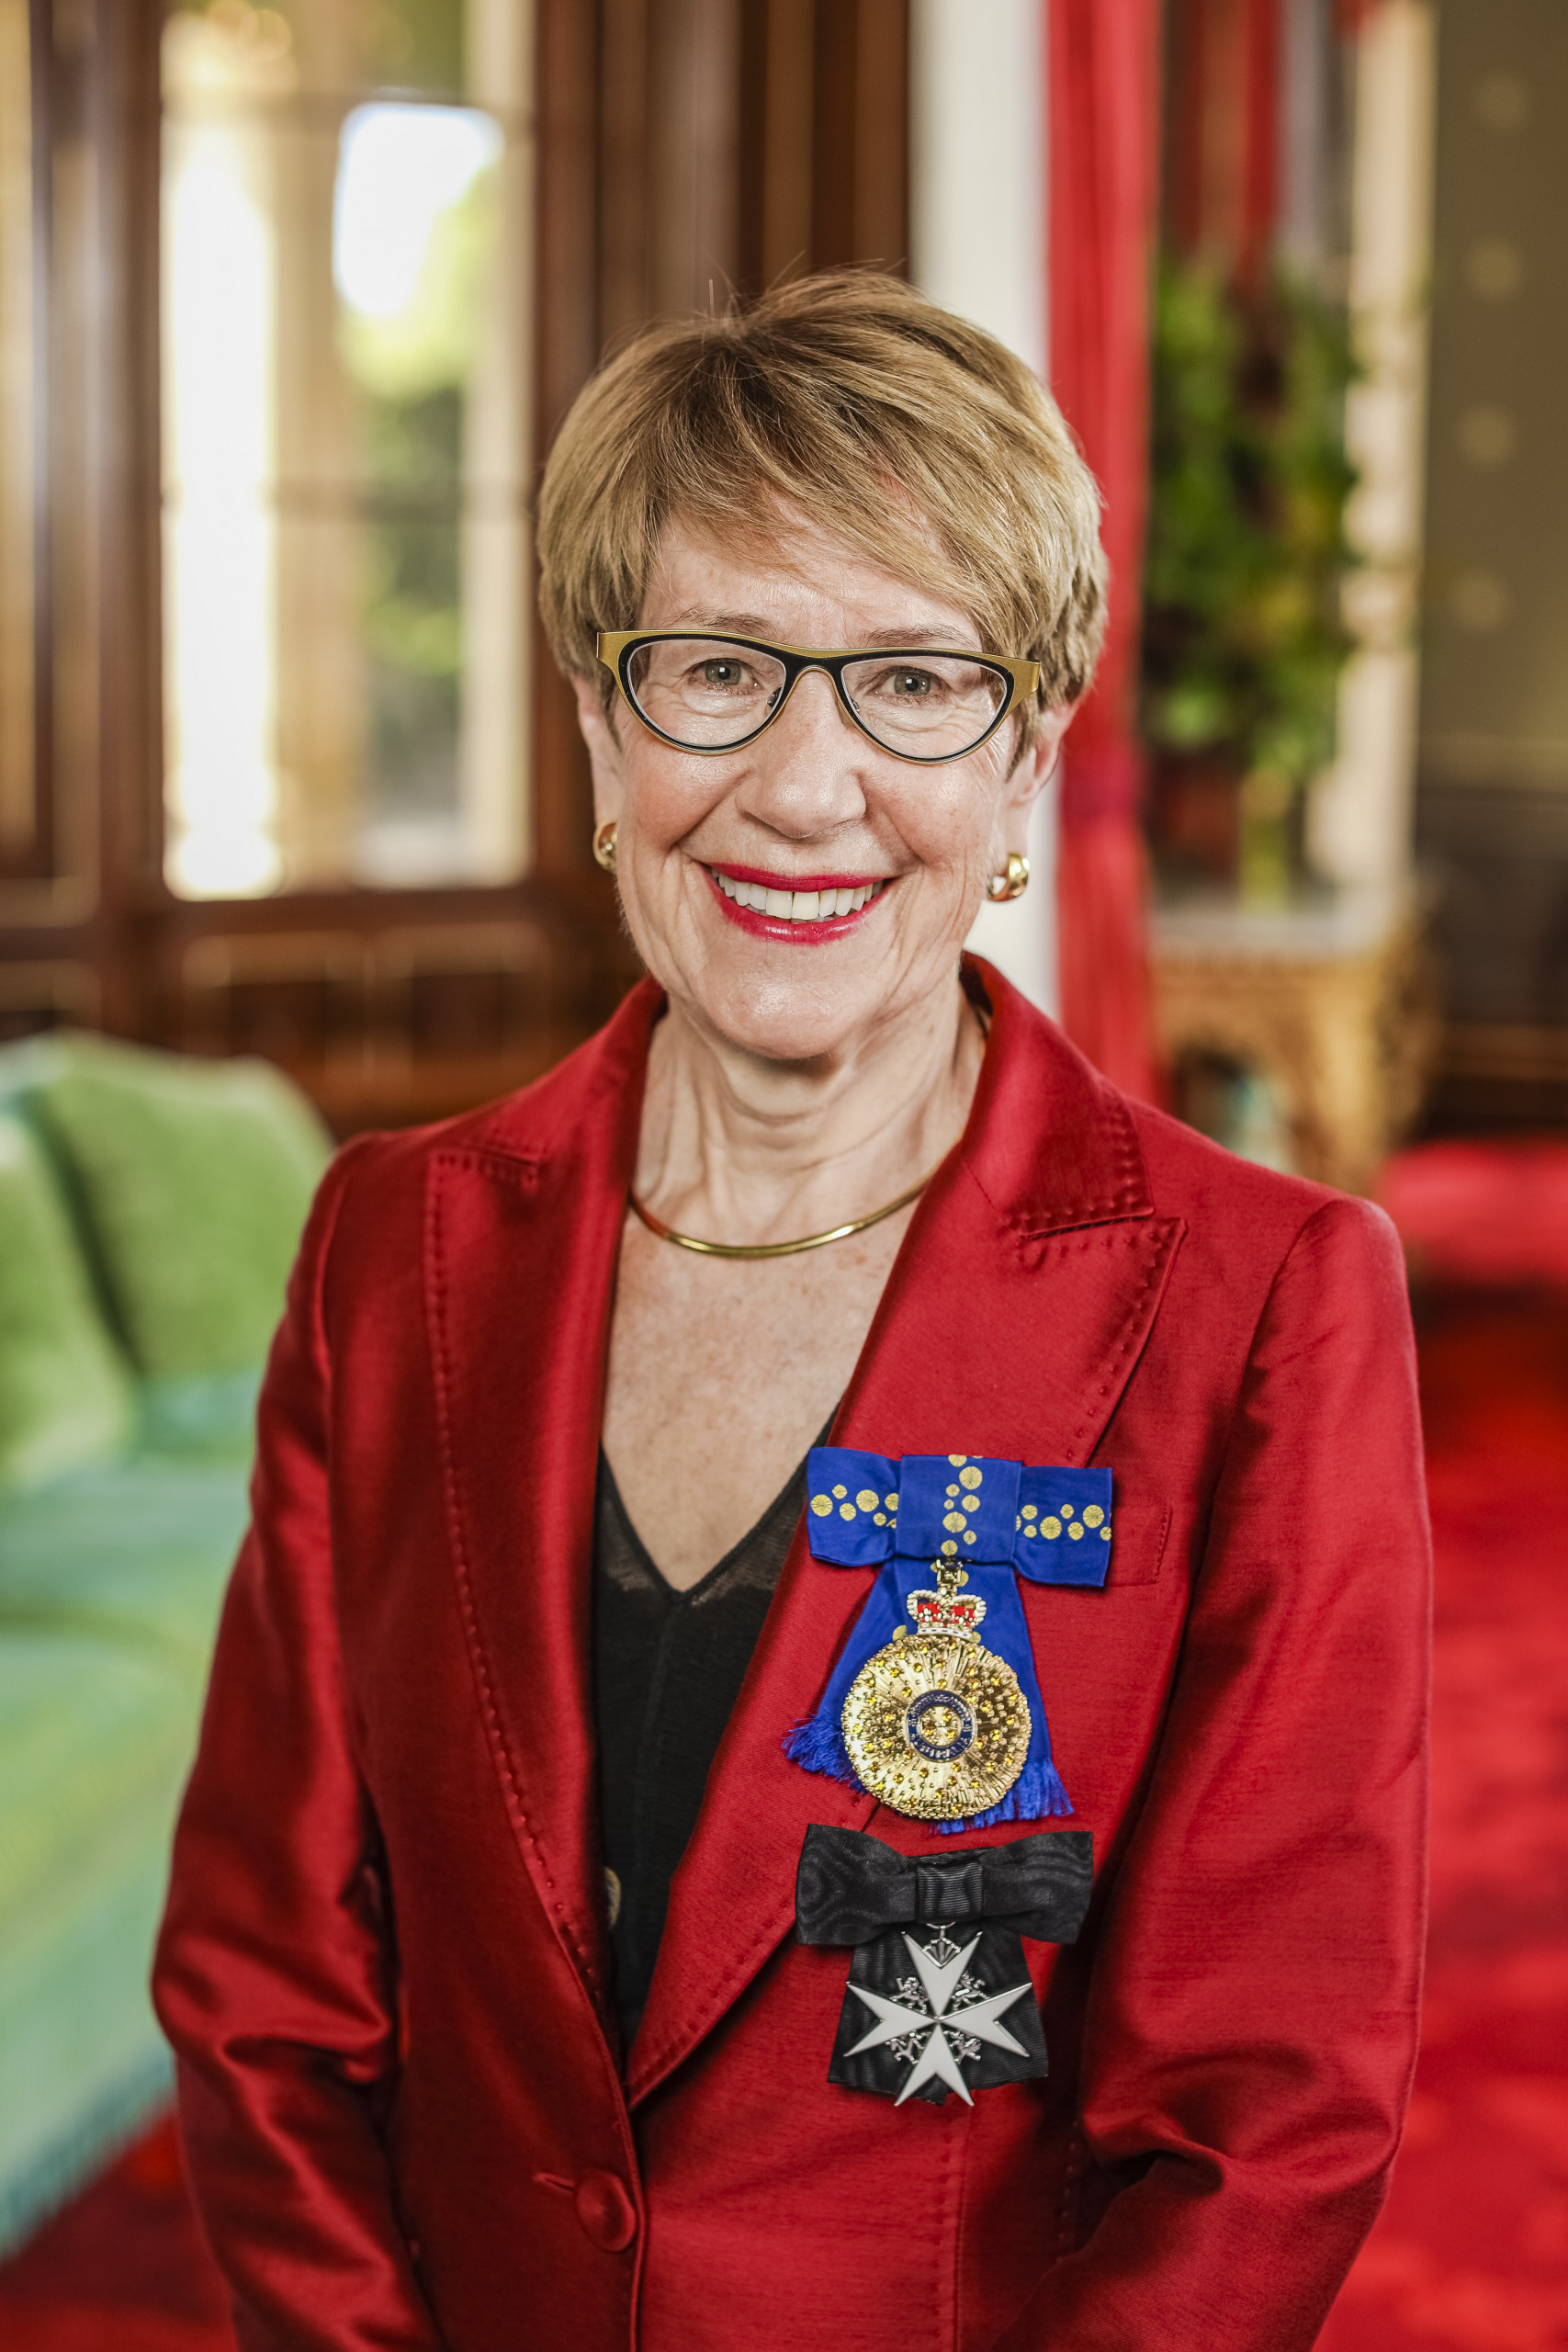 Her-Excellency-the-Honourable-Margaret-Beazley-AC-QC-Governor-of-New-South-Wales-Hi-Res.jpg